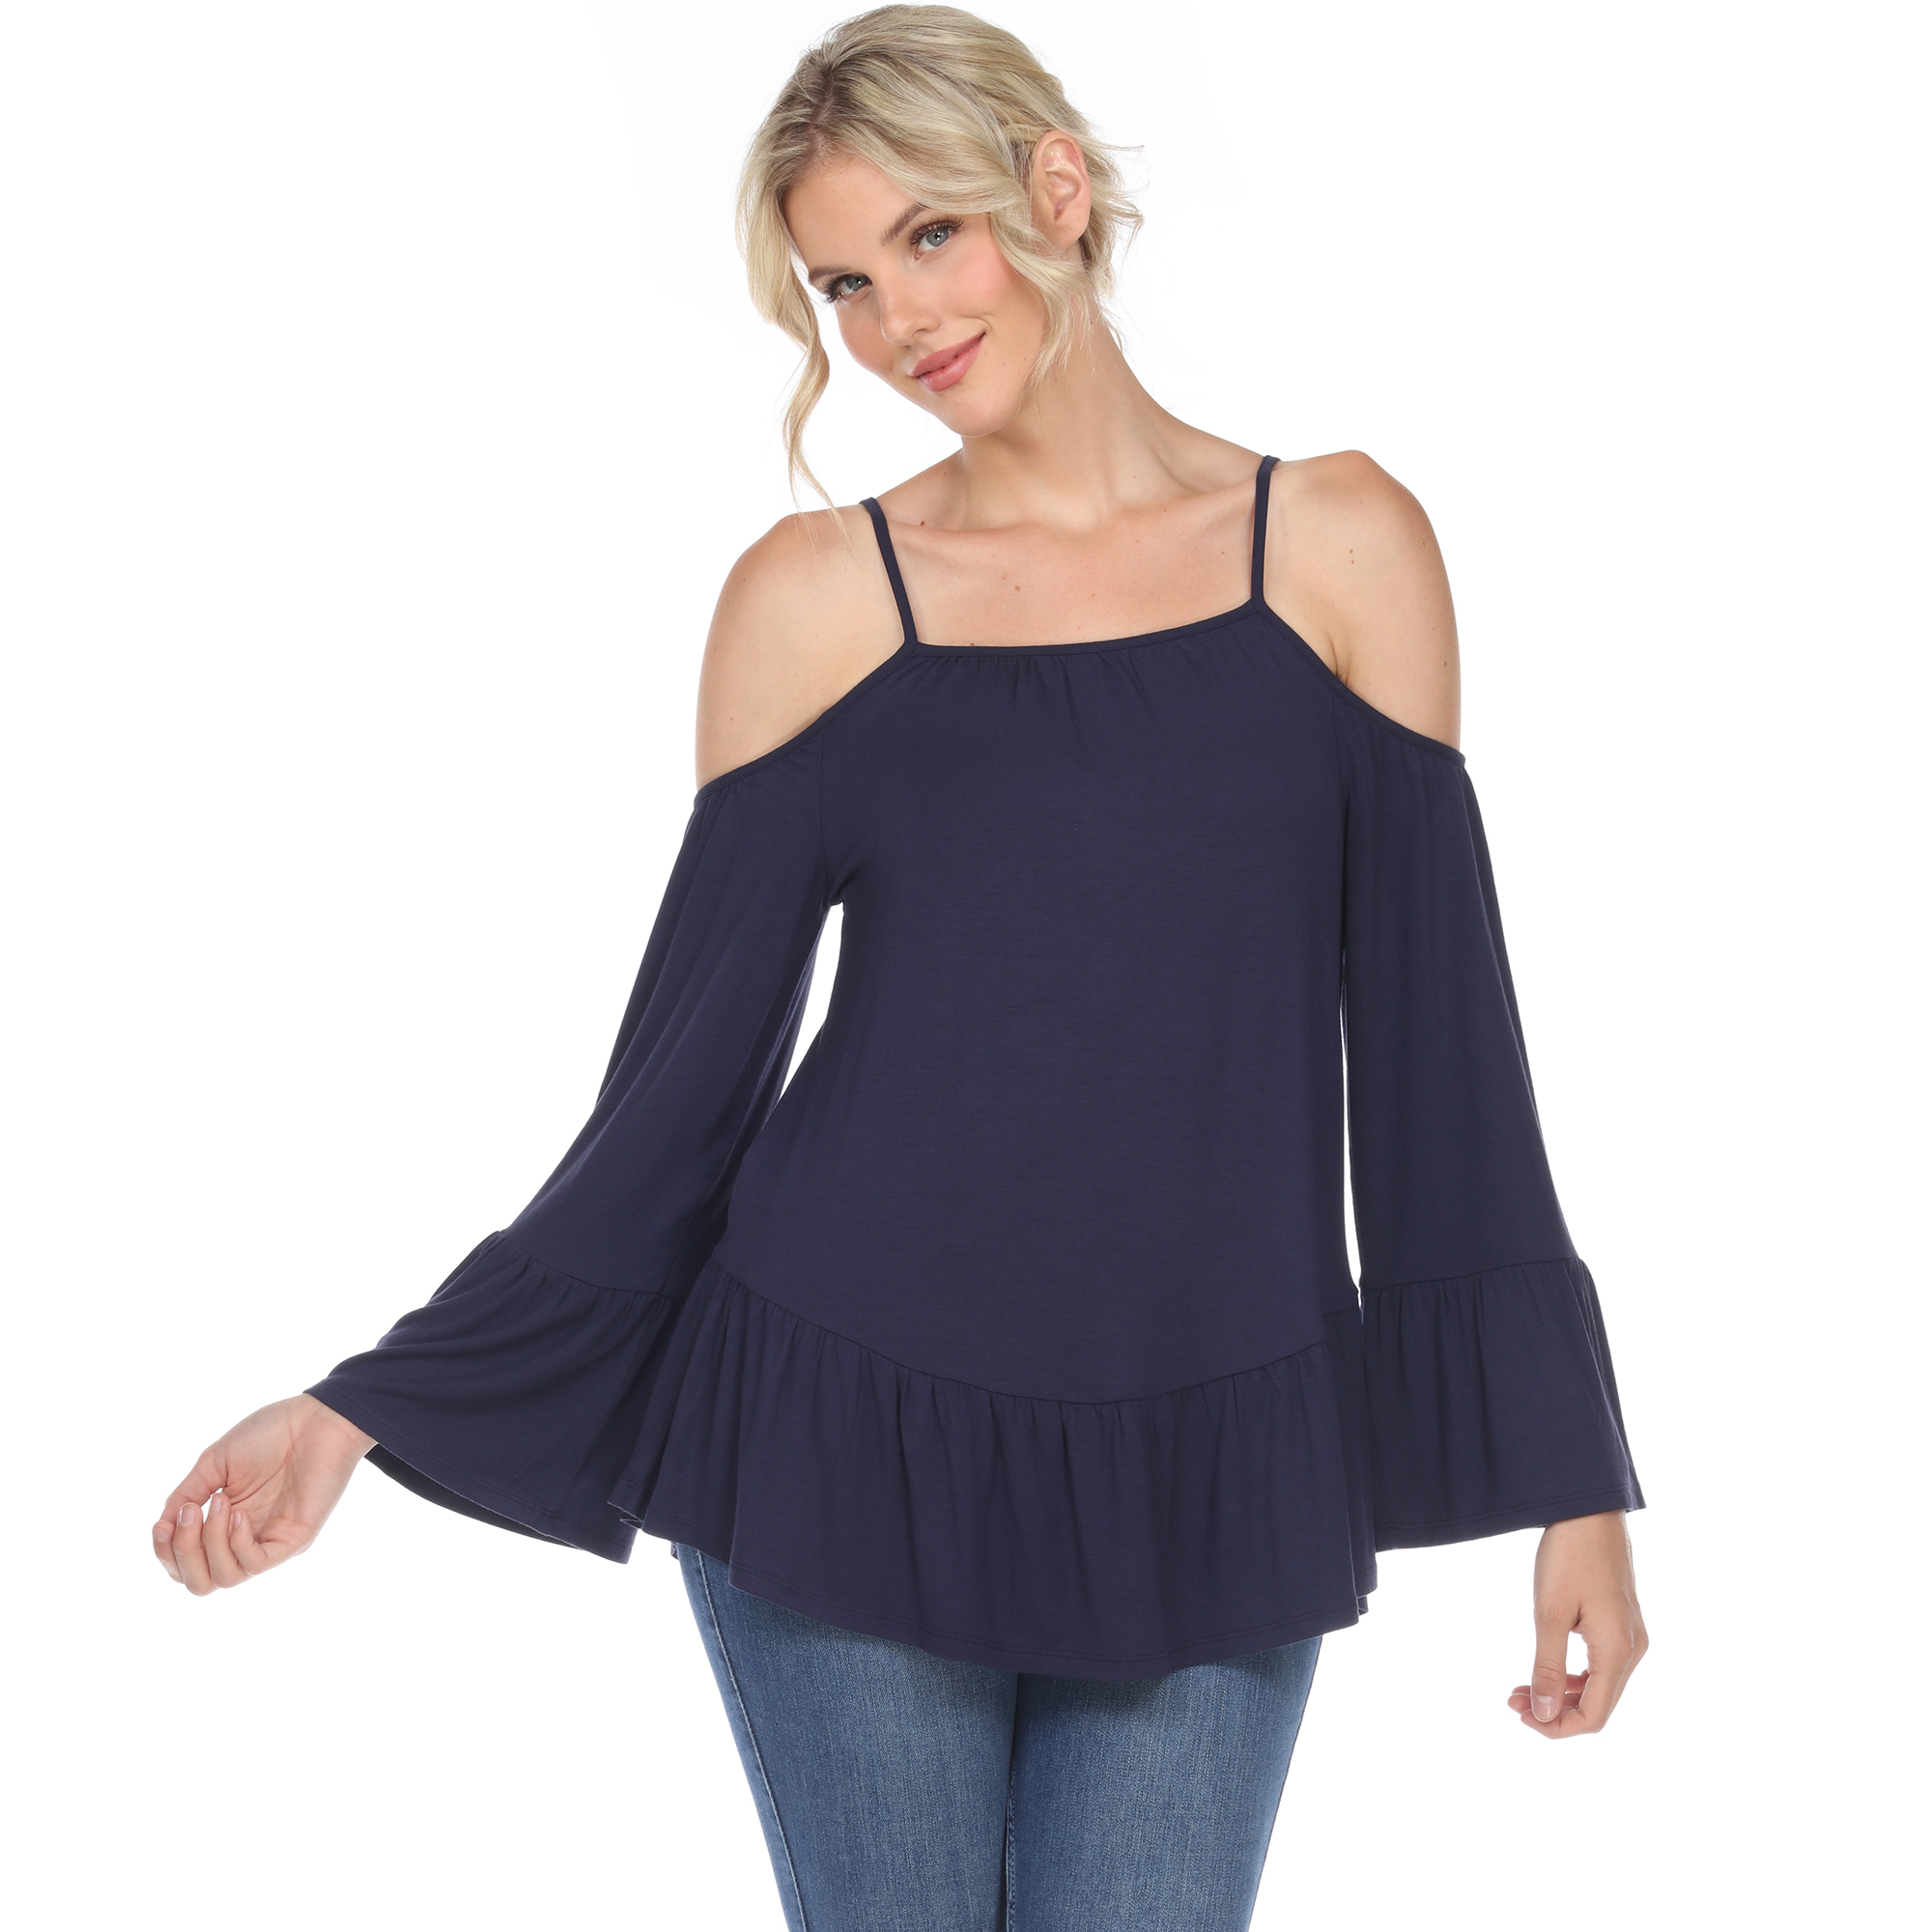 White Mark Women's Cold Shoulder Ruffle Sleeve Top - Navy, X-Large